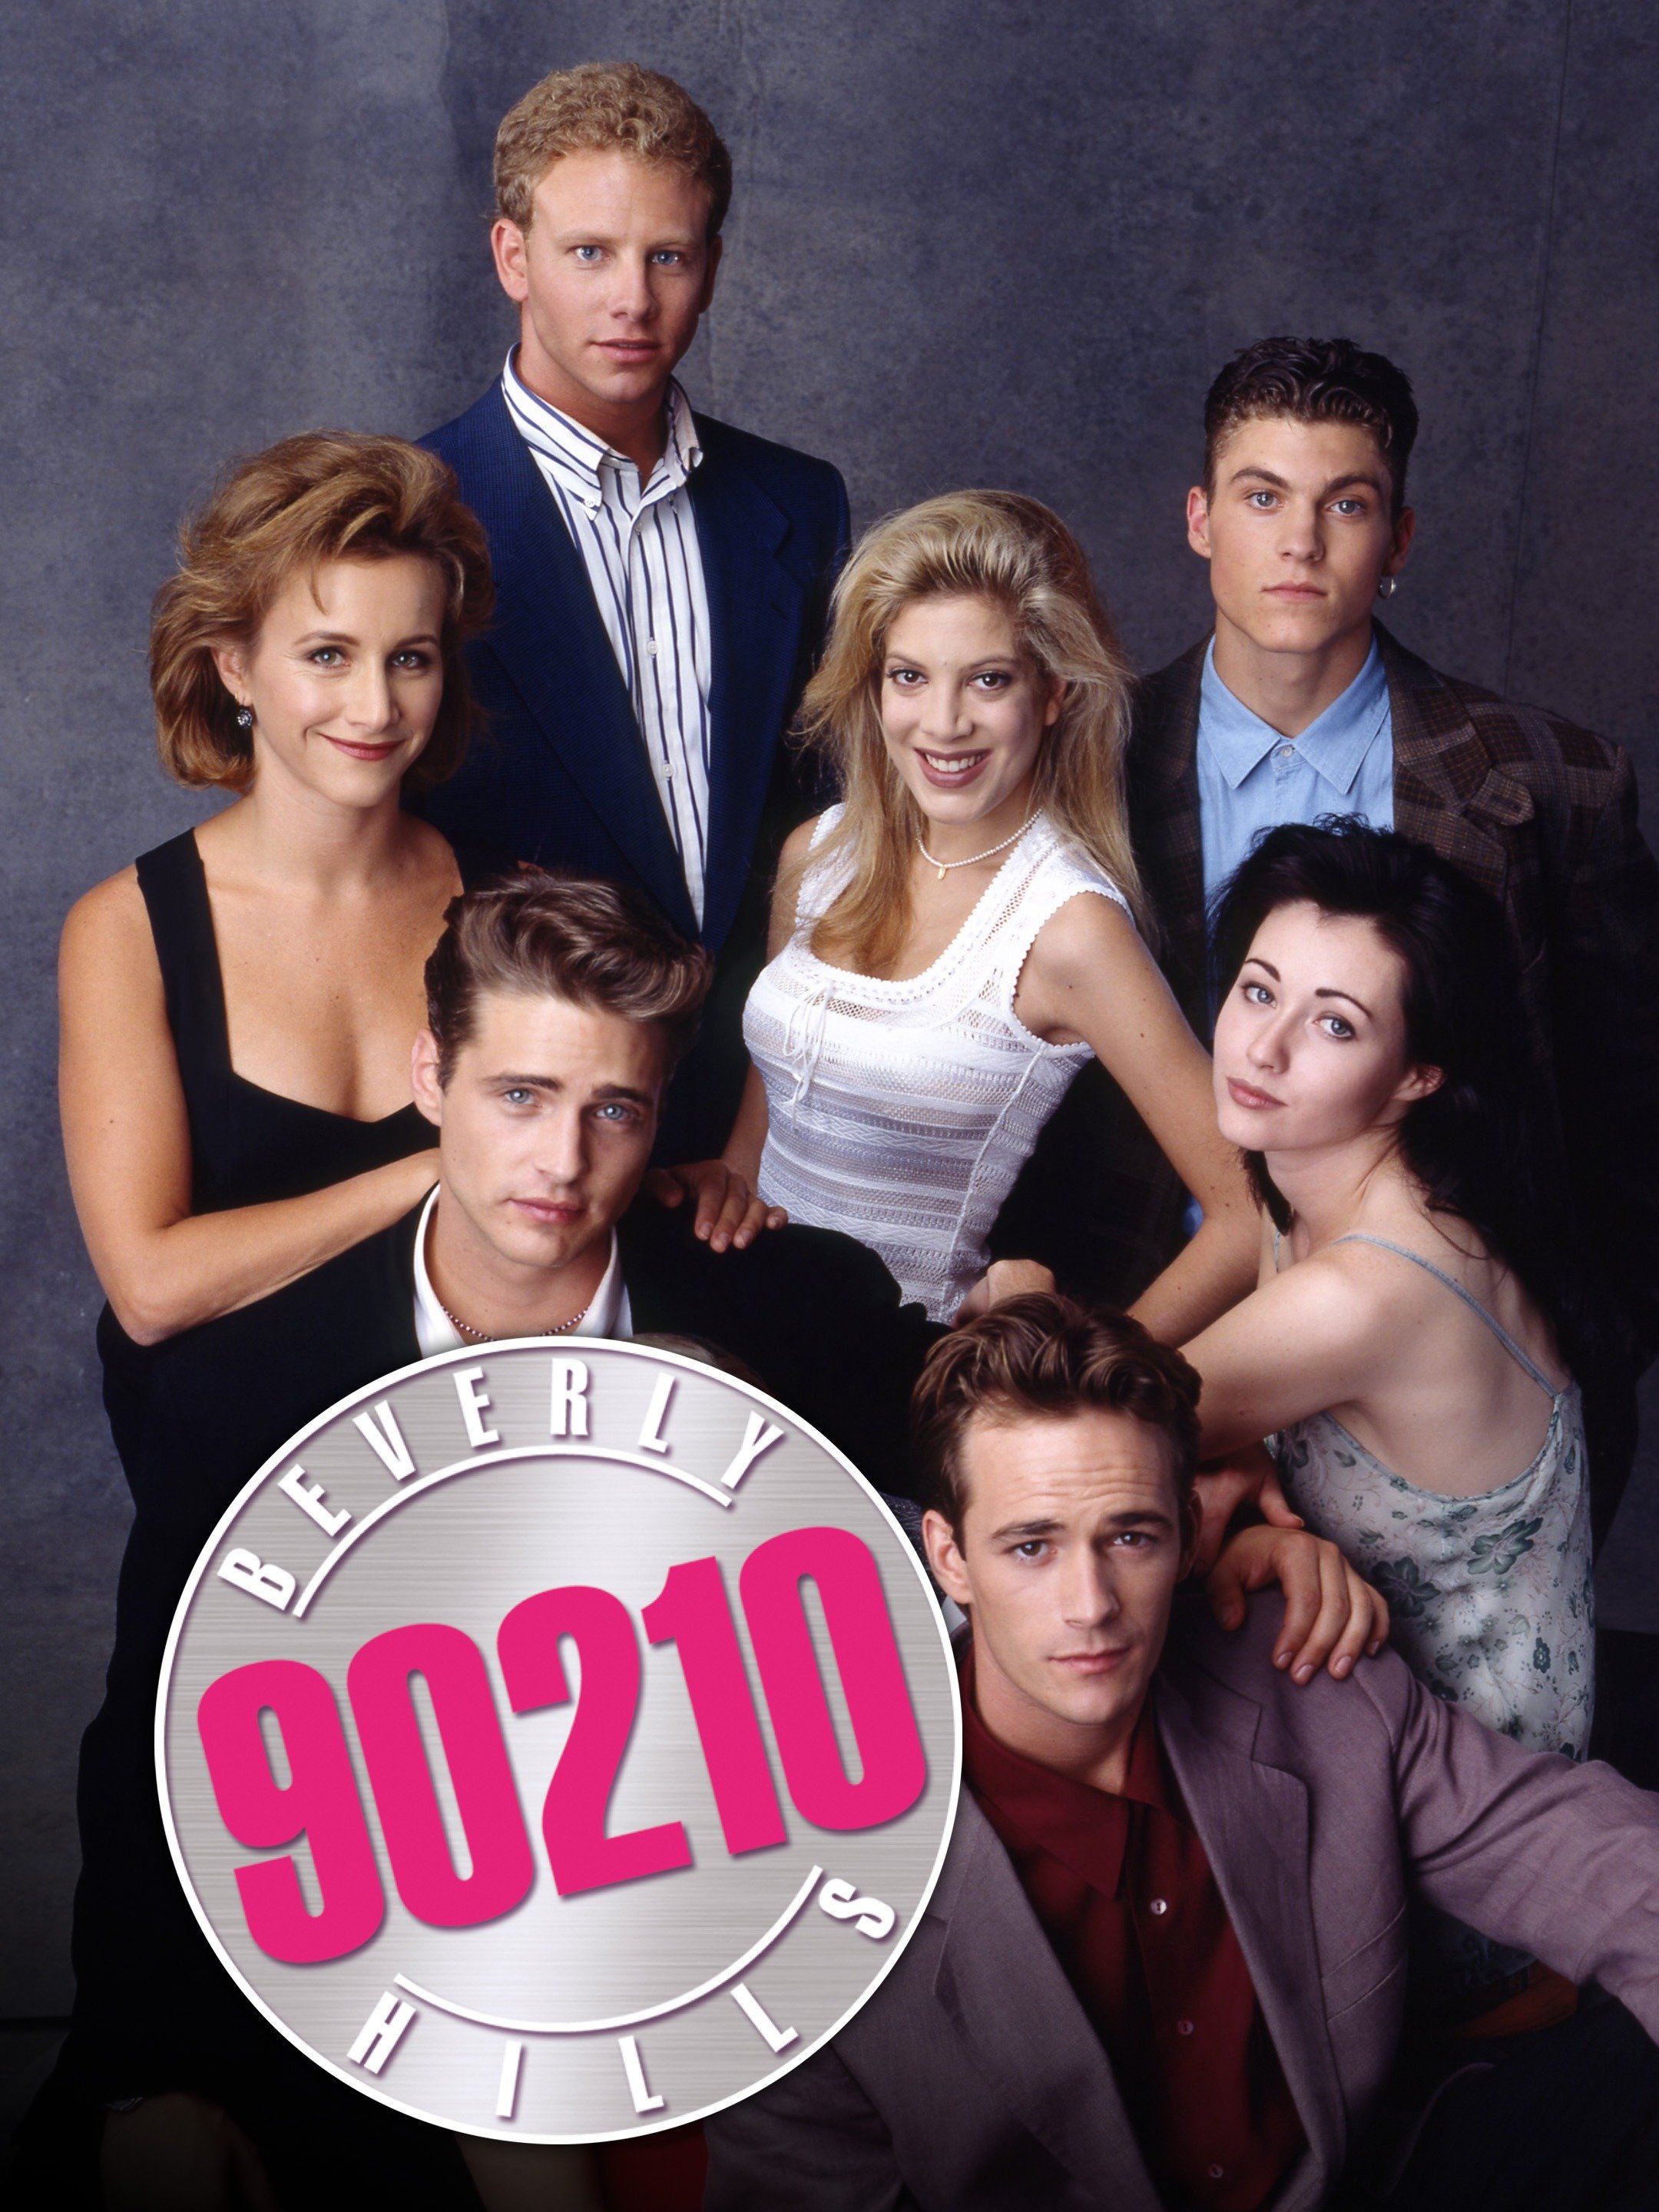 beverly-hills-90210-season-3-pictures-rotten-tomatoes